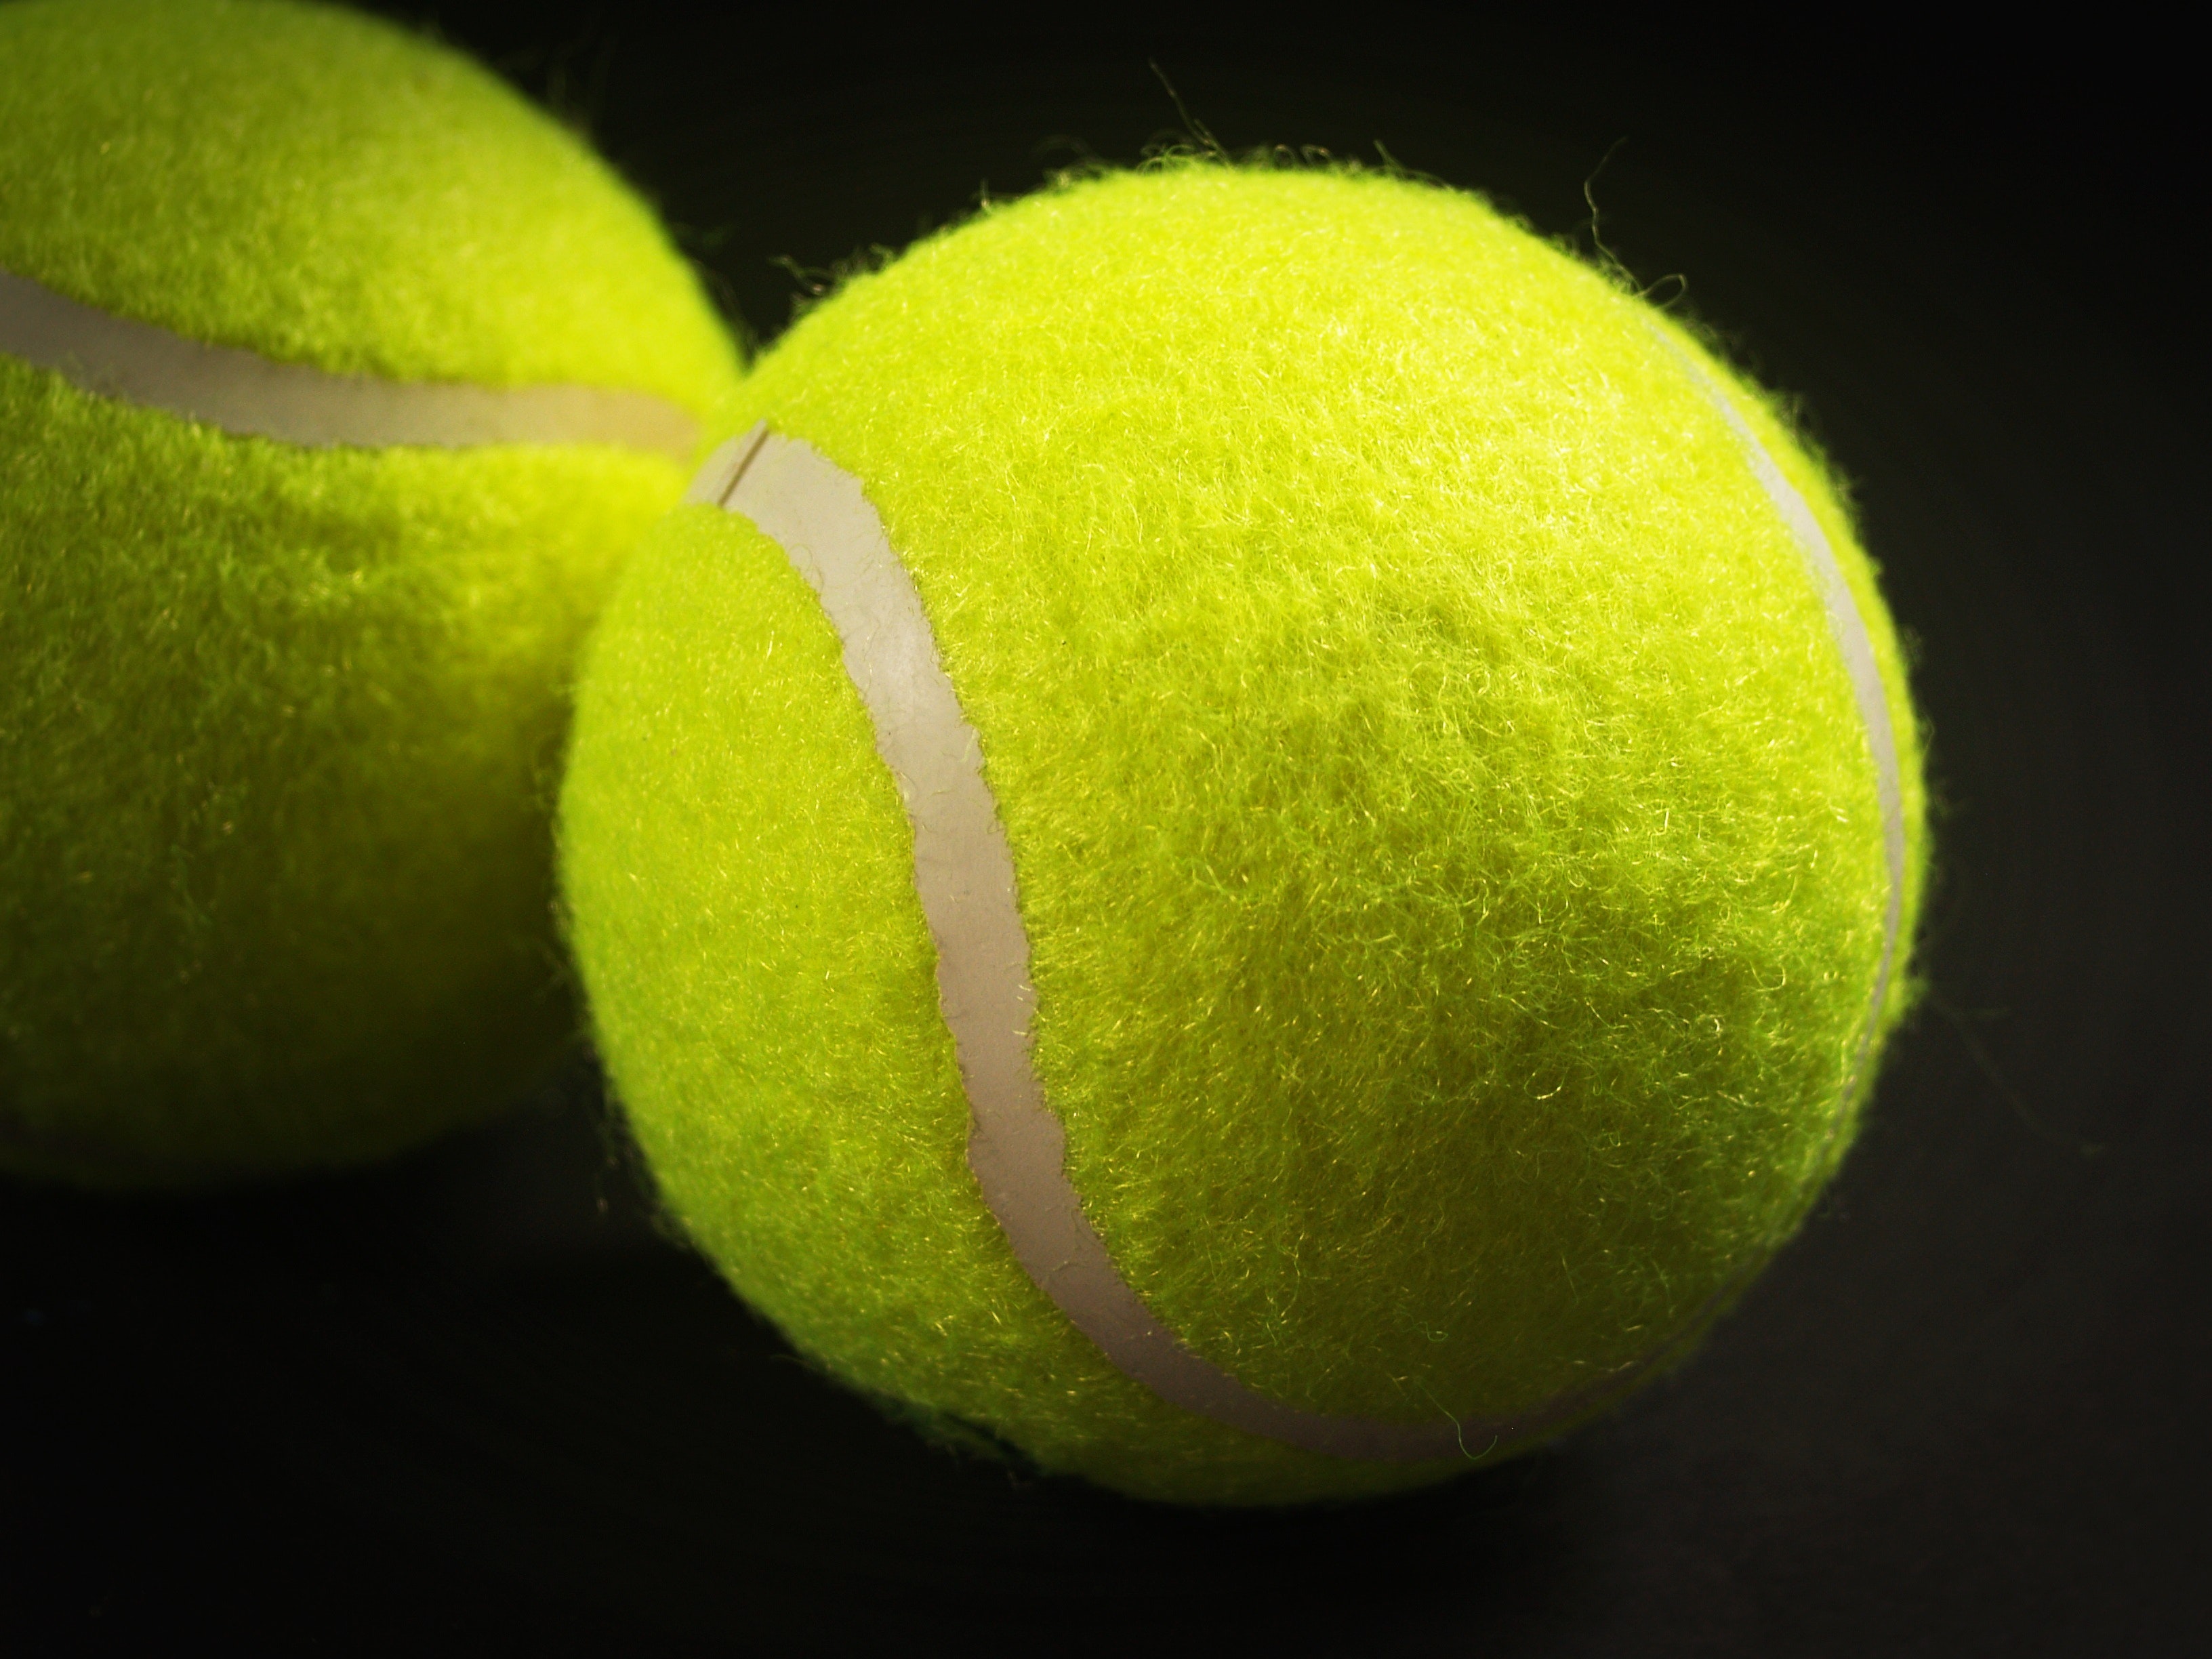 A Guide to Understanding Tennis Scores